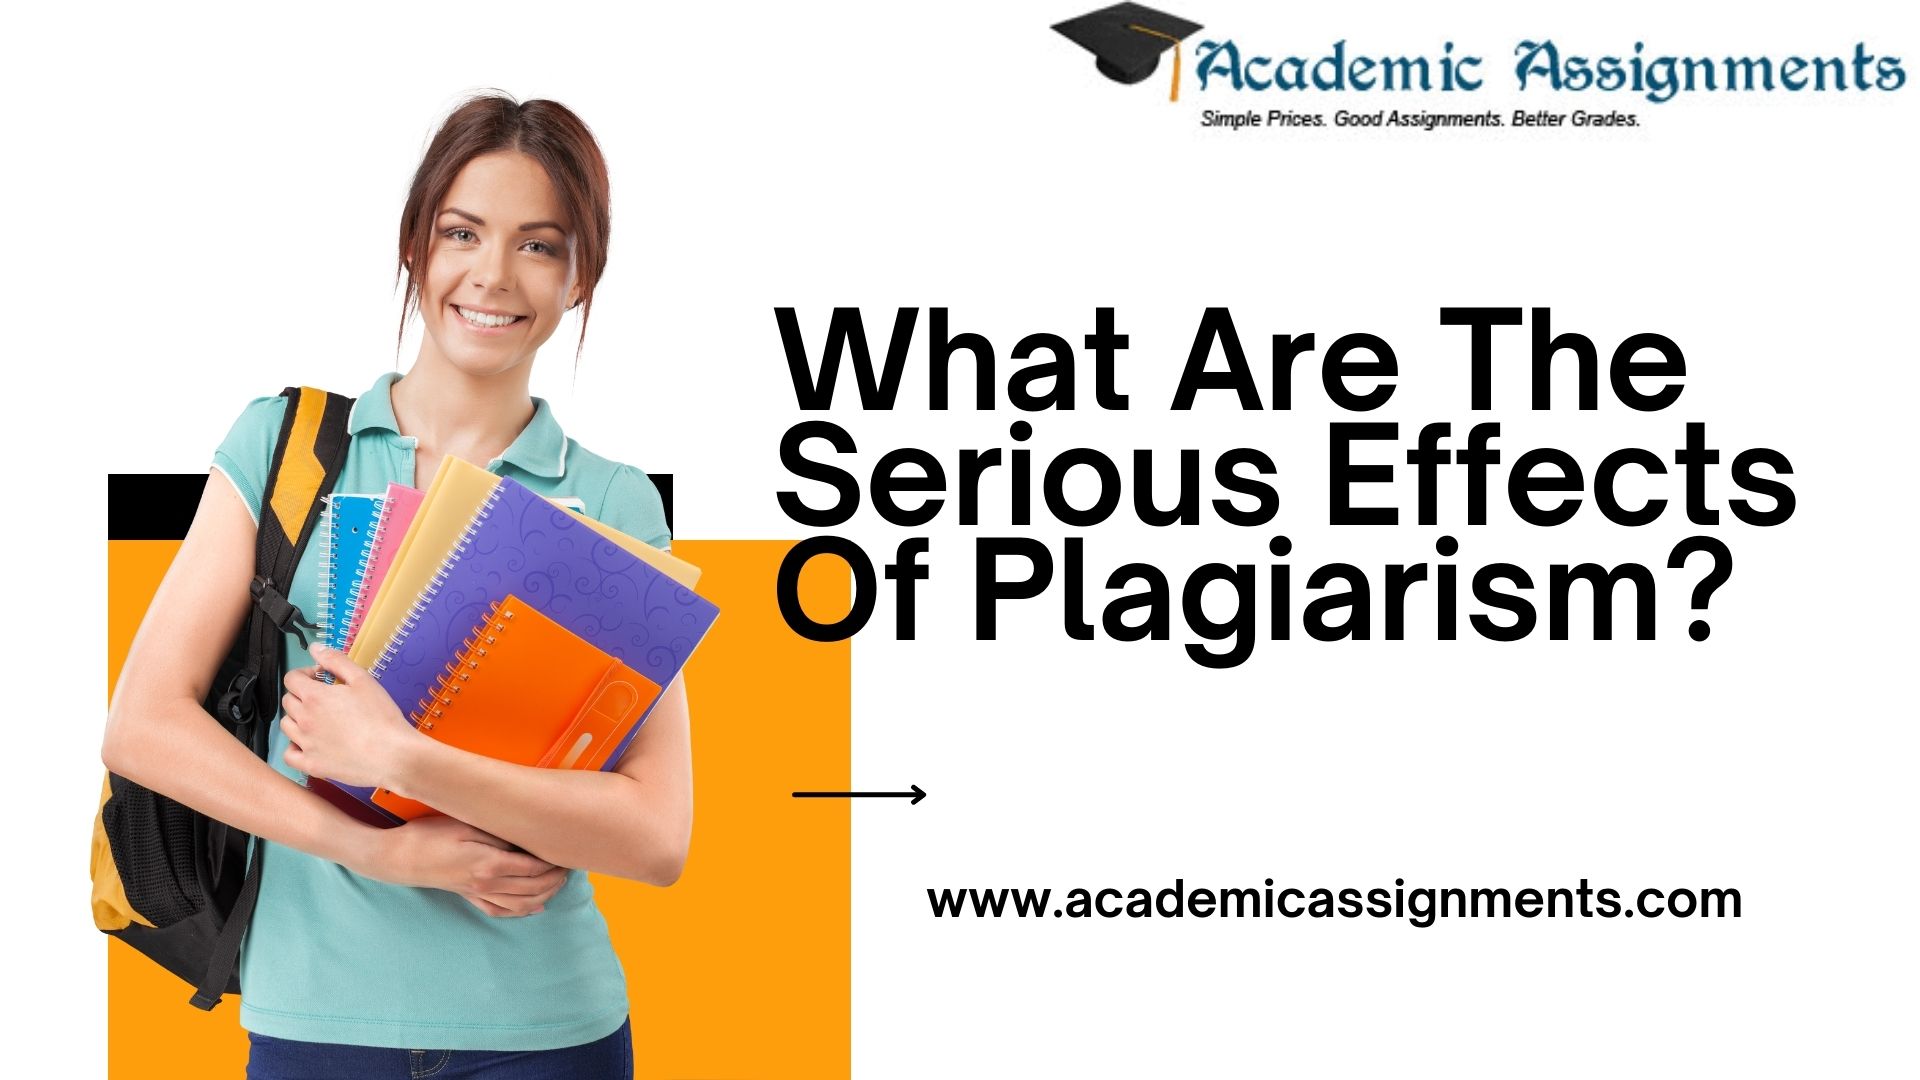 What Are The Serious Effects Of Plagiarism